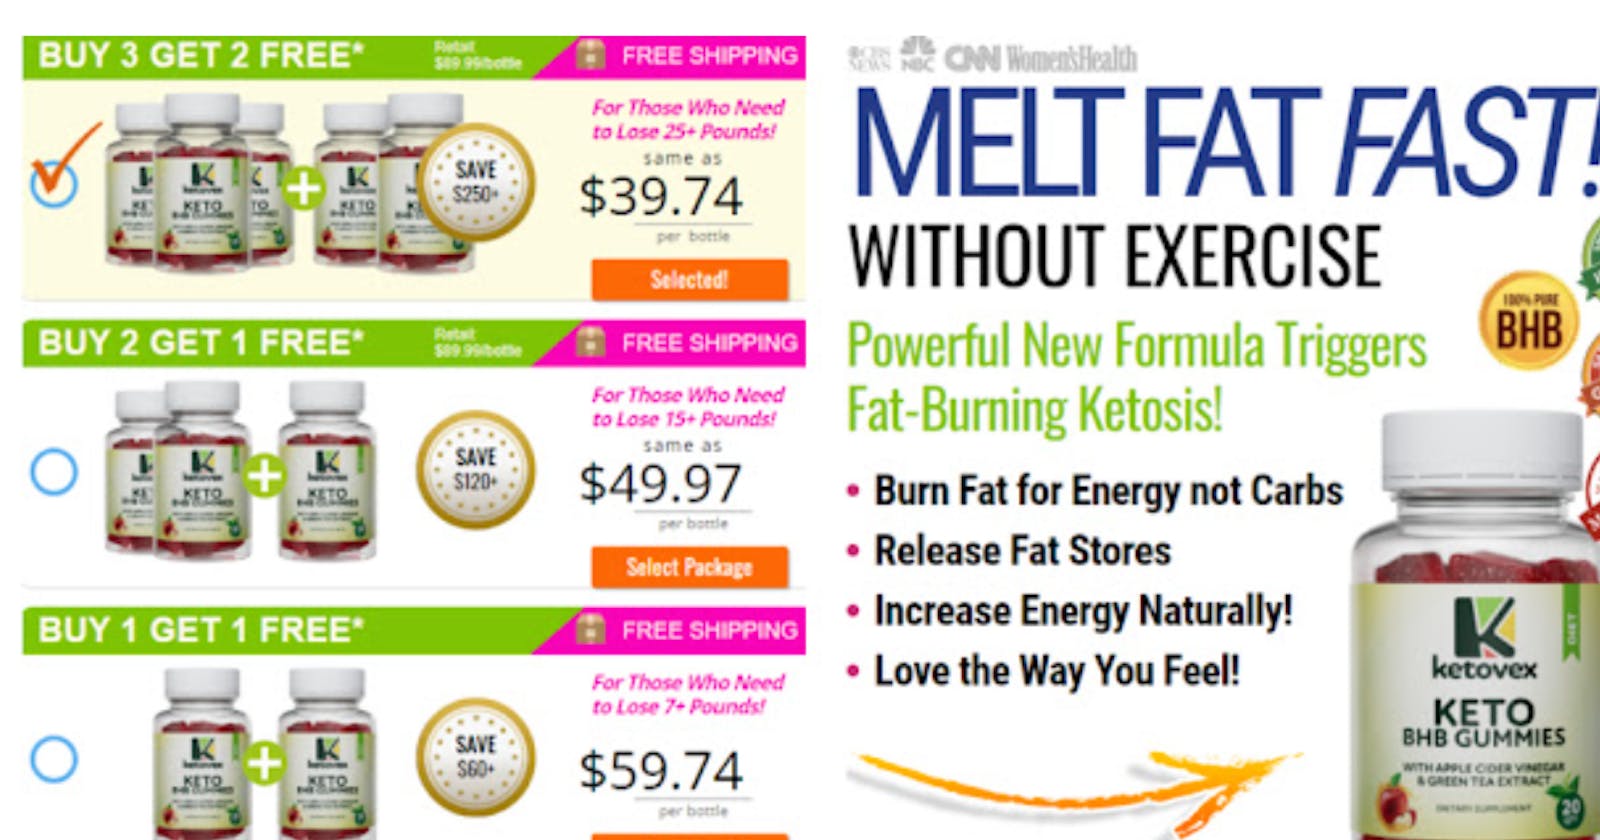 Ketovex Keto BHB Gummies — Safe & Real Ingredients For Weight Loss!